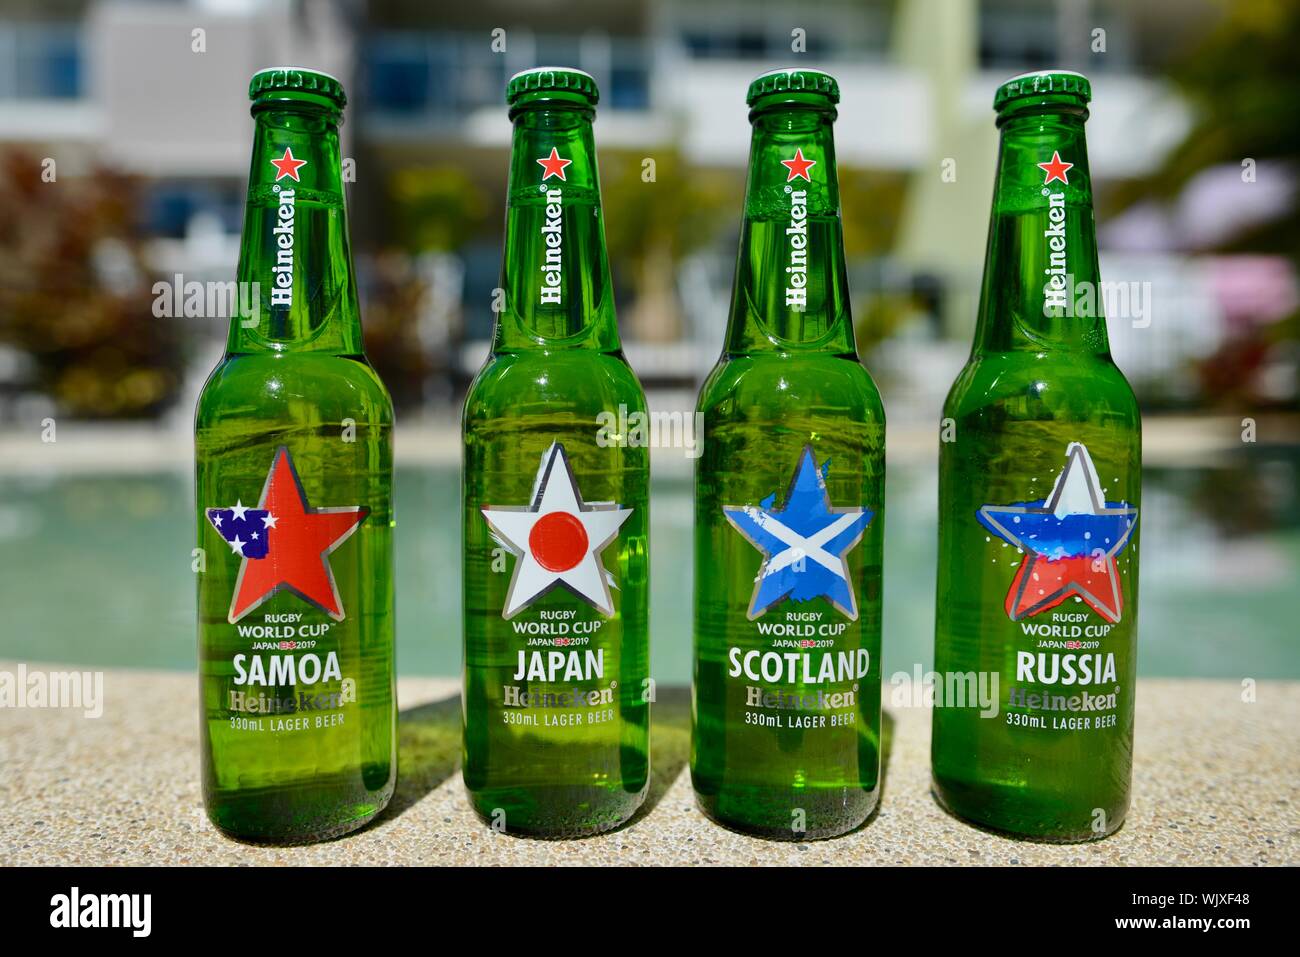 Samoa, Japan, Scotland and Russia, Pool A, Heineken 2019 Japan Rugby world cup beer bottles Stock Photo